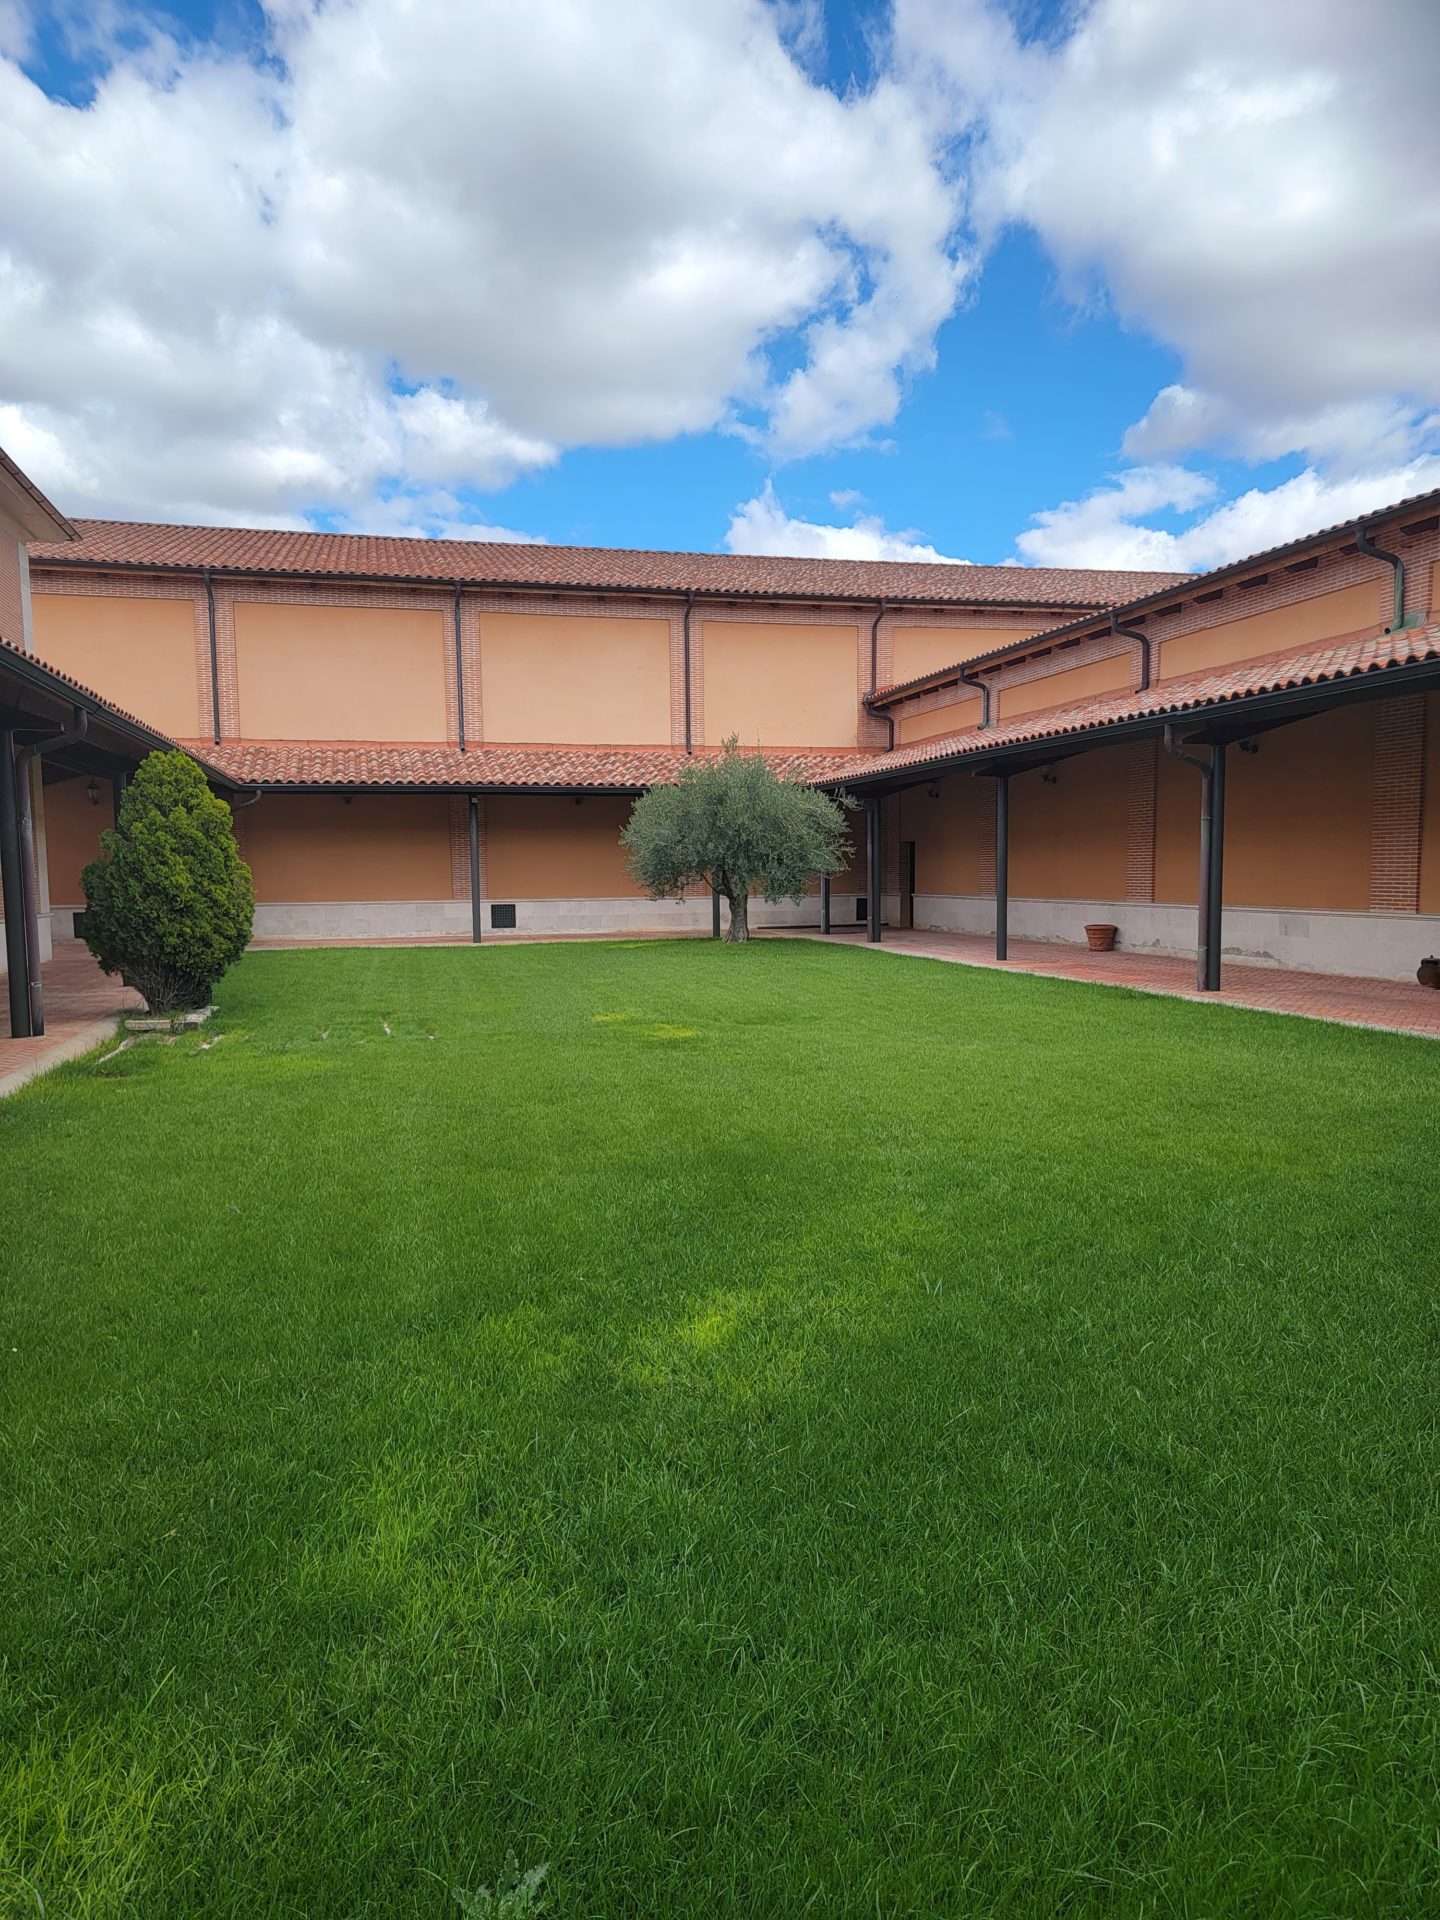 a courtyard with a tree and grass